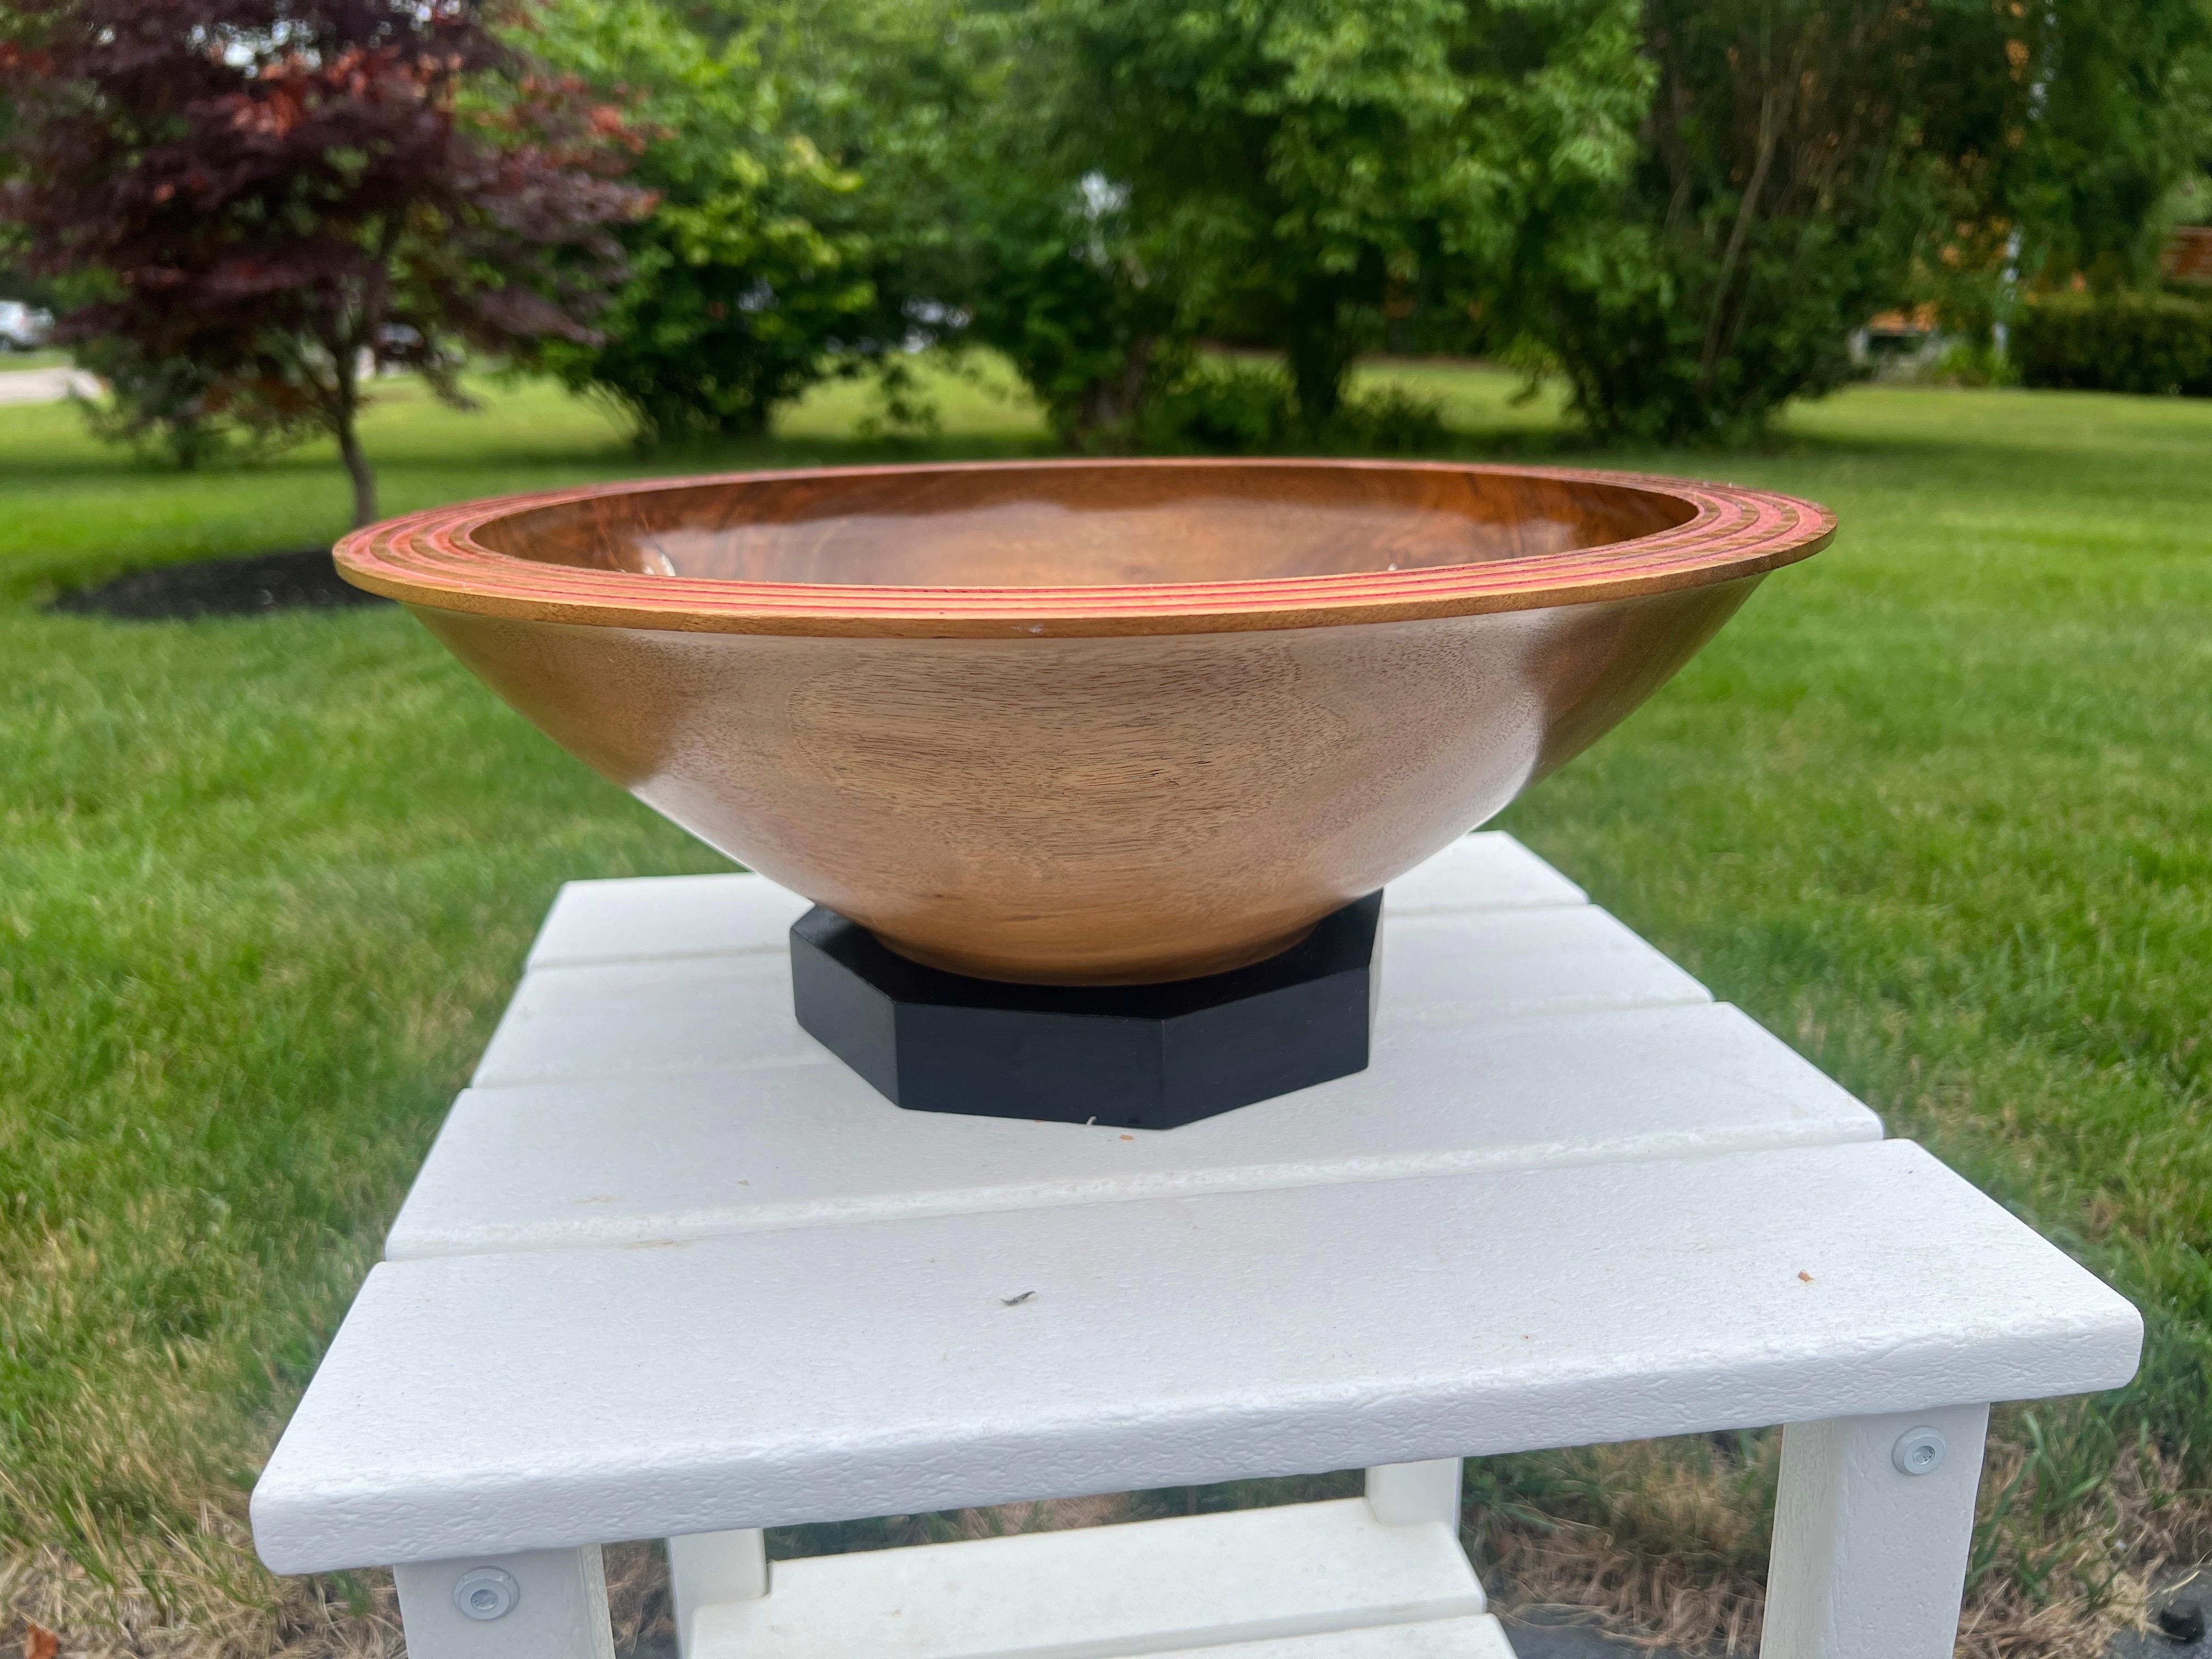 Large Modernist Artisan Made Inlaid Walnut Centerpiece Bowl on Stand - Signed

This walnut centerpiece bowl is artisan made likely in the New England area with expert craftsmanship from the beveled ridges along the edge to the string inlay to